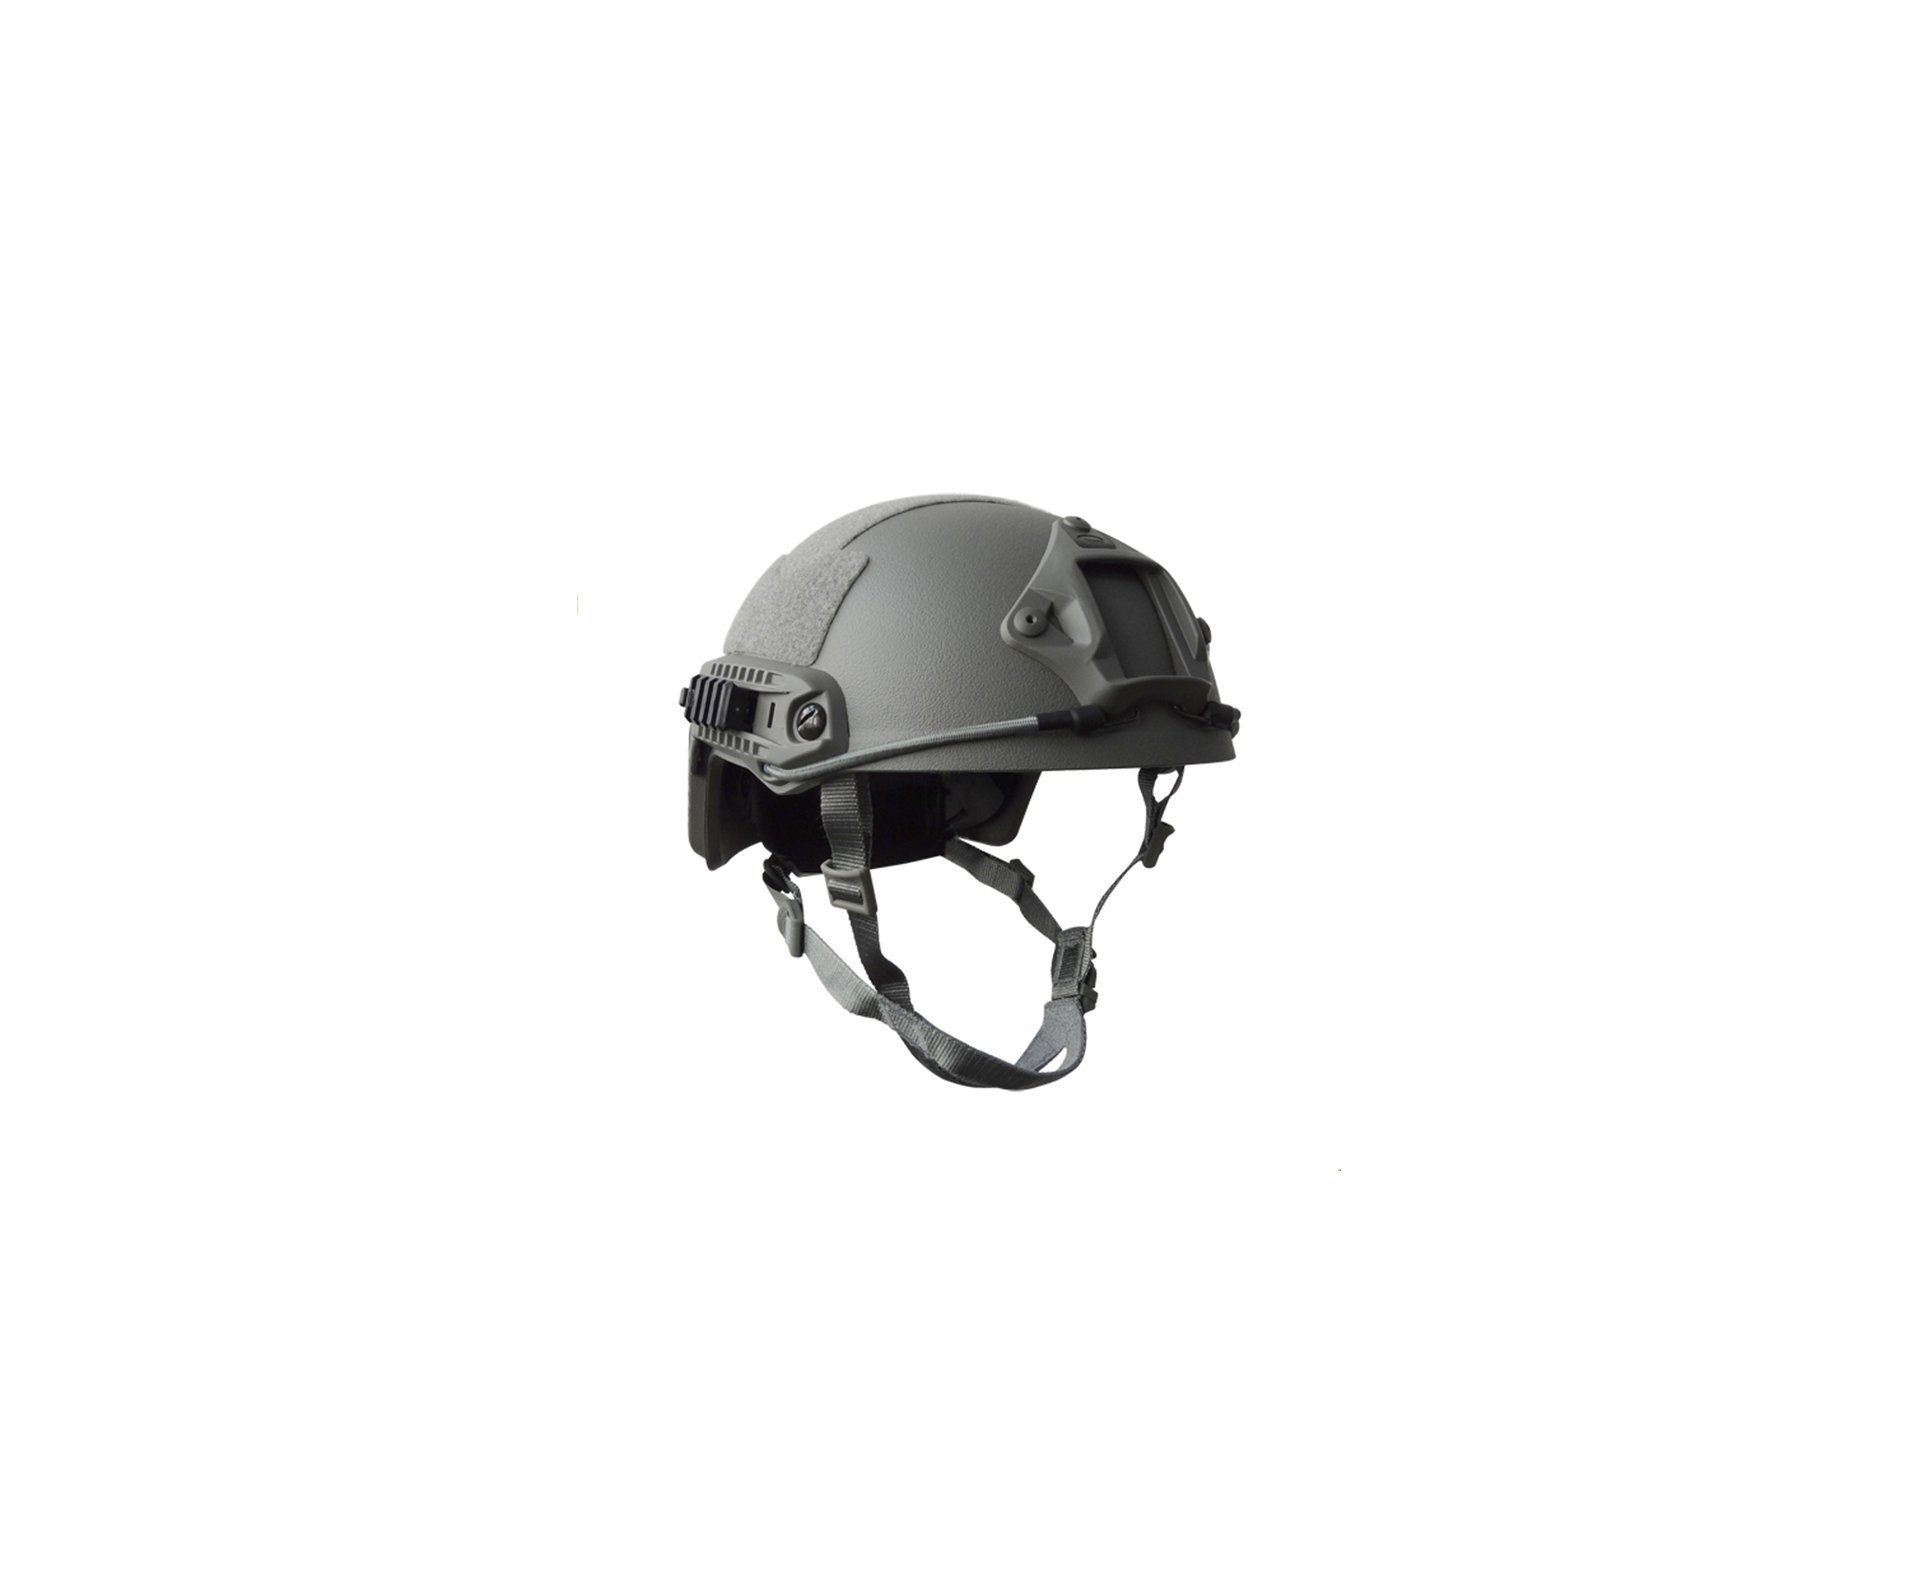 Capacete Tático Para Airsoft/paintball Mod Fast B Foliage Green